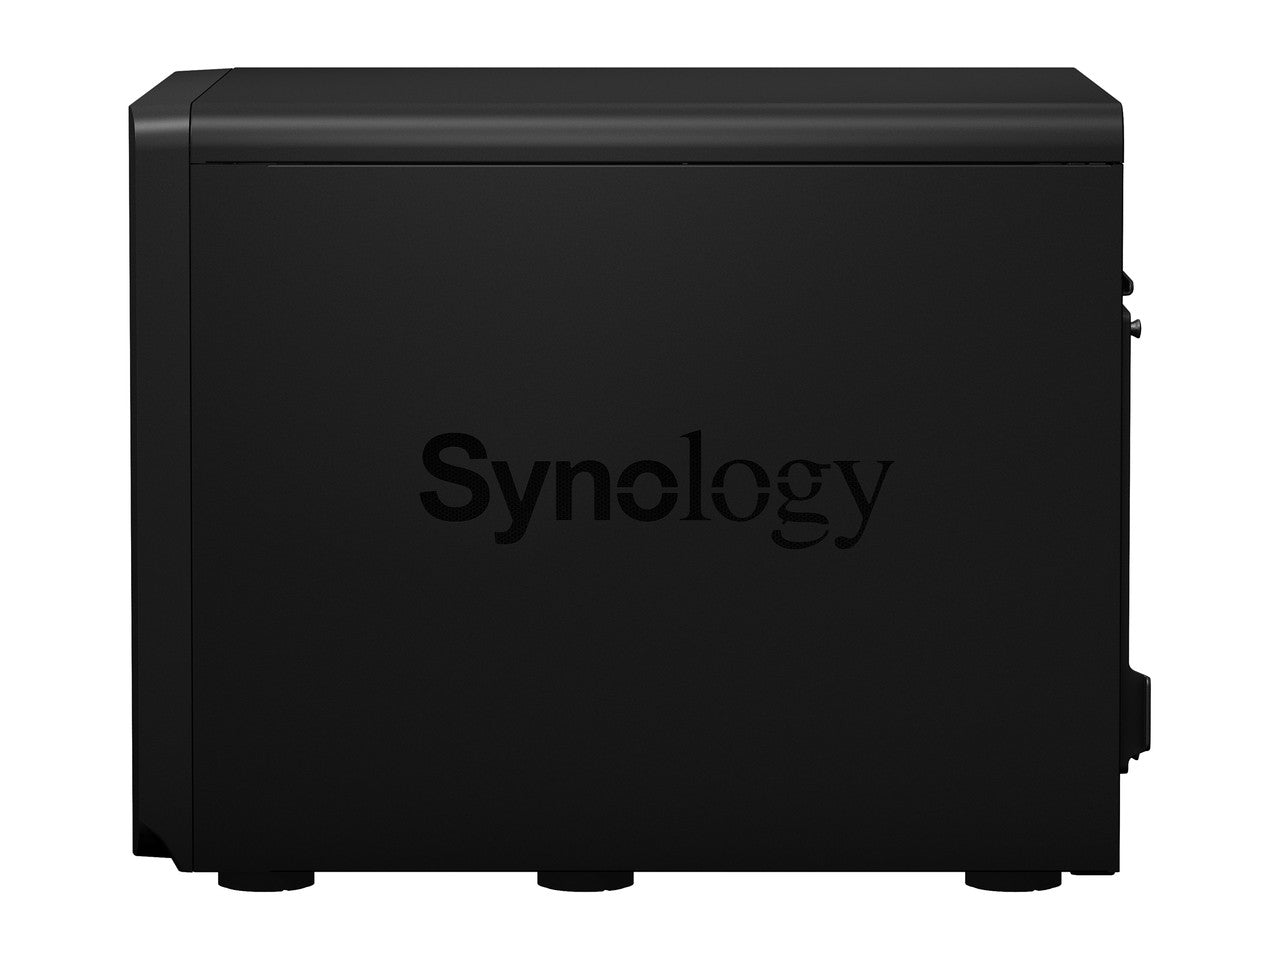 Synology DS2422+ Quad Core 2.2Ghz 12-Bay NAS with E10M20 10GbE Port and 800GB (2x400GB) CACHE, 4GB RAM and 144TB (12 x 12TB) of Synology Enterprise Drives